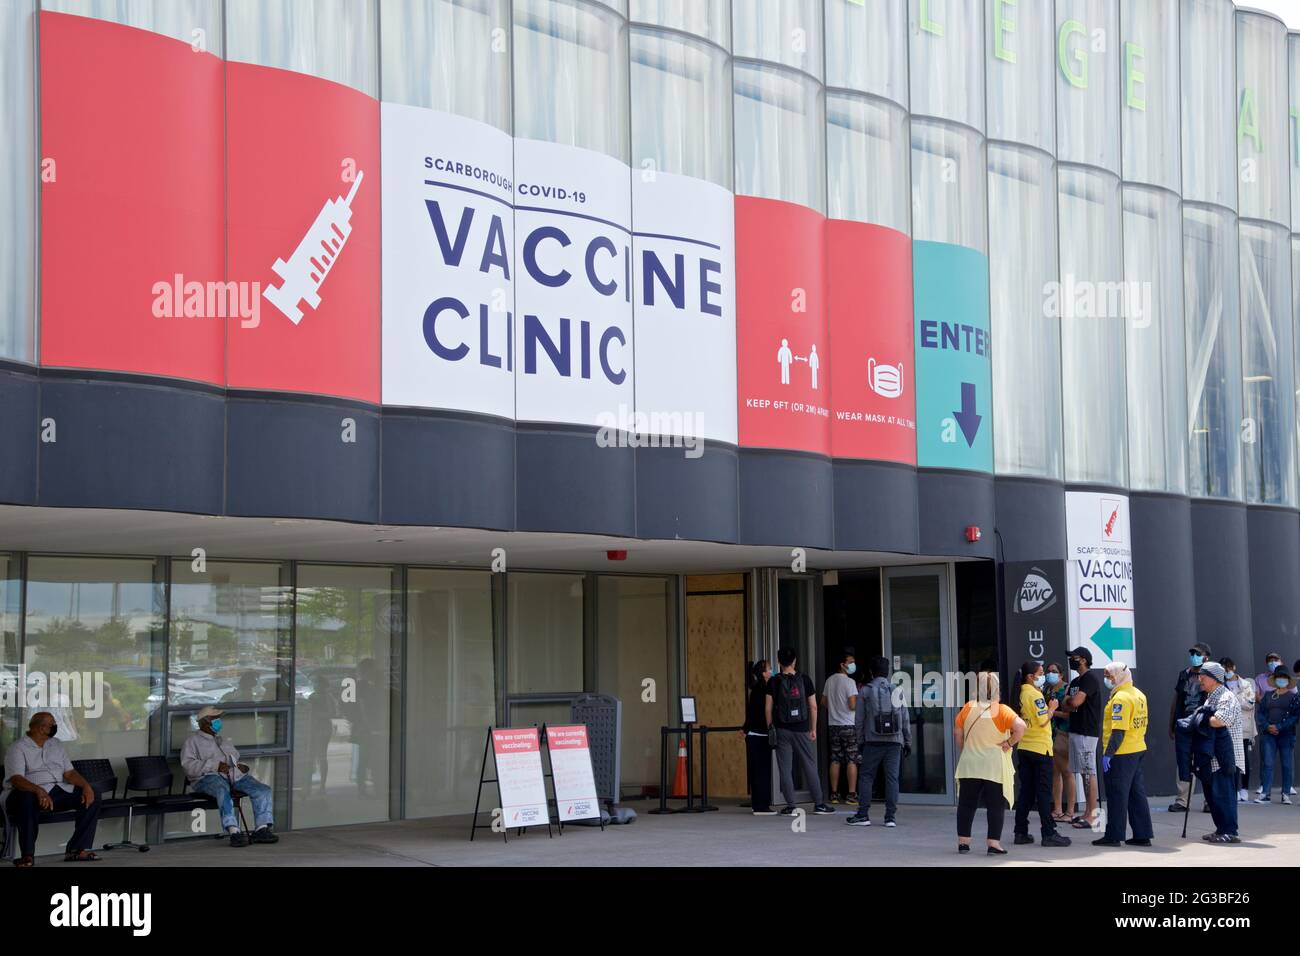 Toronto, Ontario, Canada - June 14, 2021: View of the front entrance of covid-19 vaccine clinic in Toronto, Canada. Stock Photo